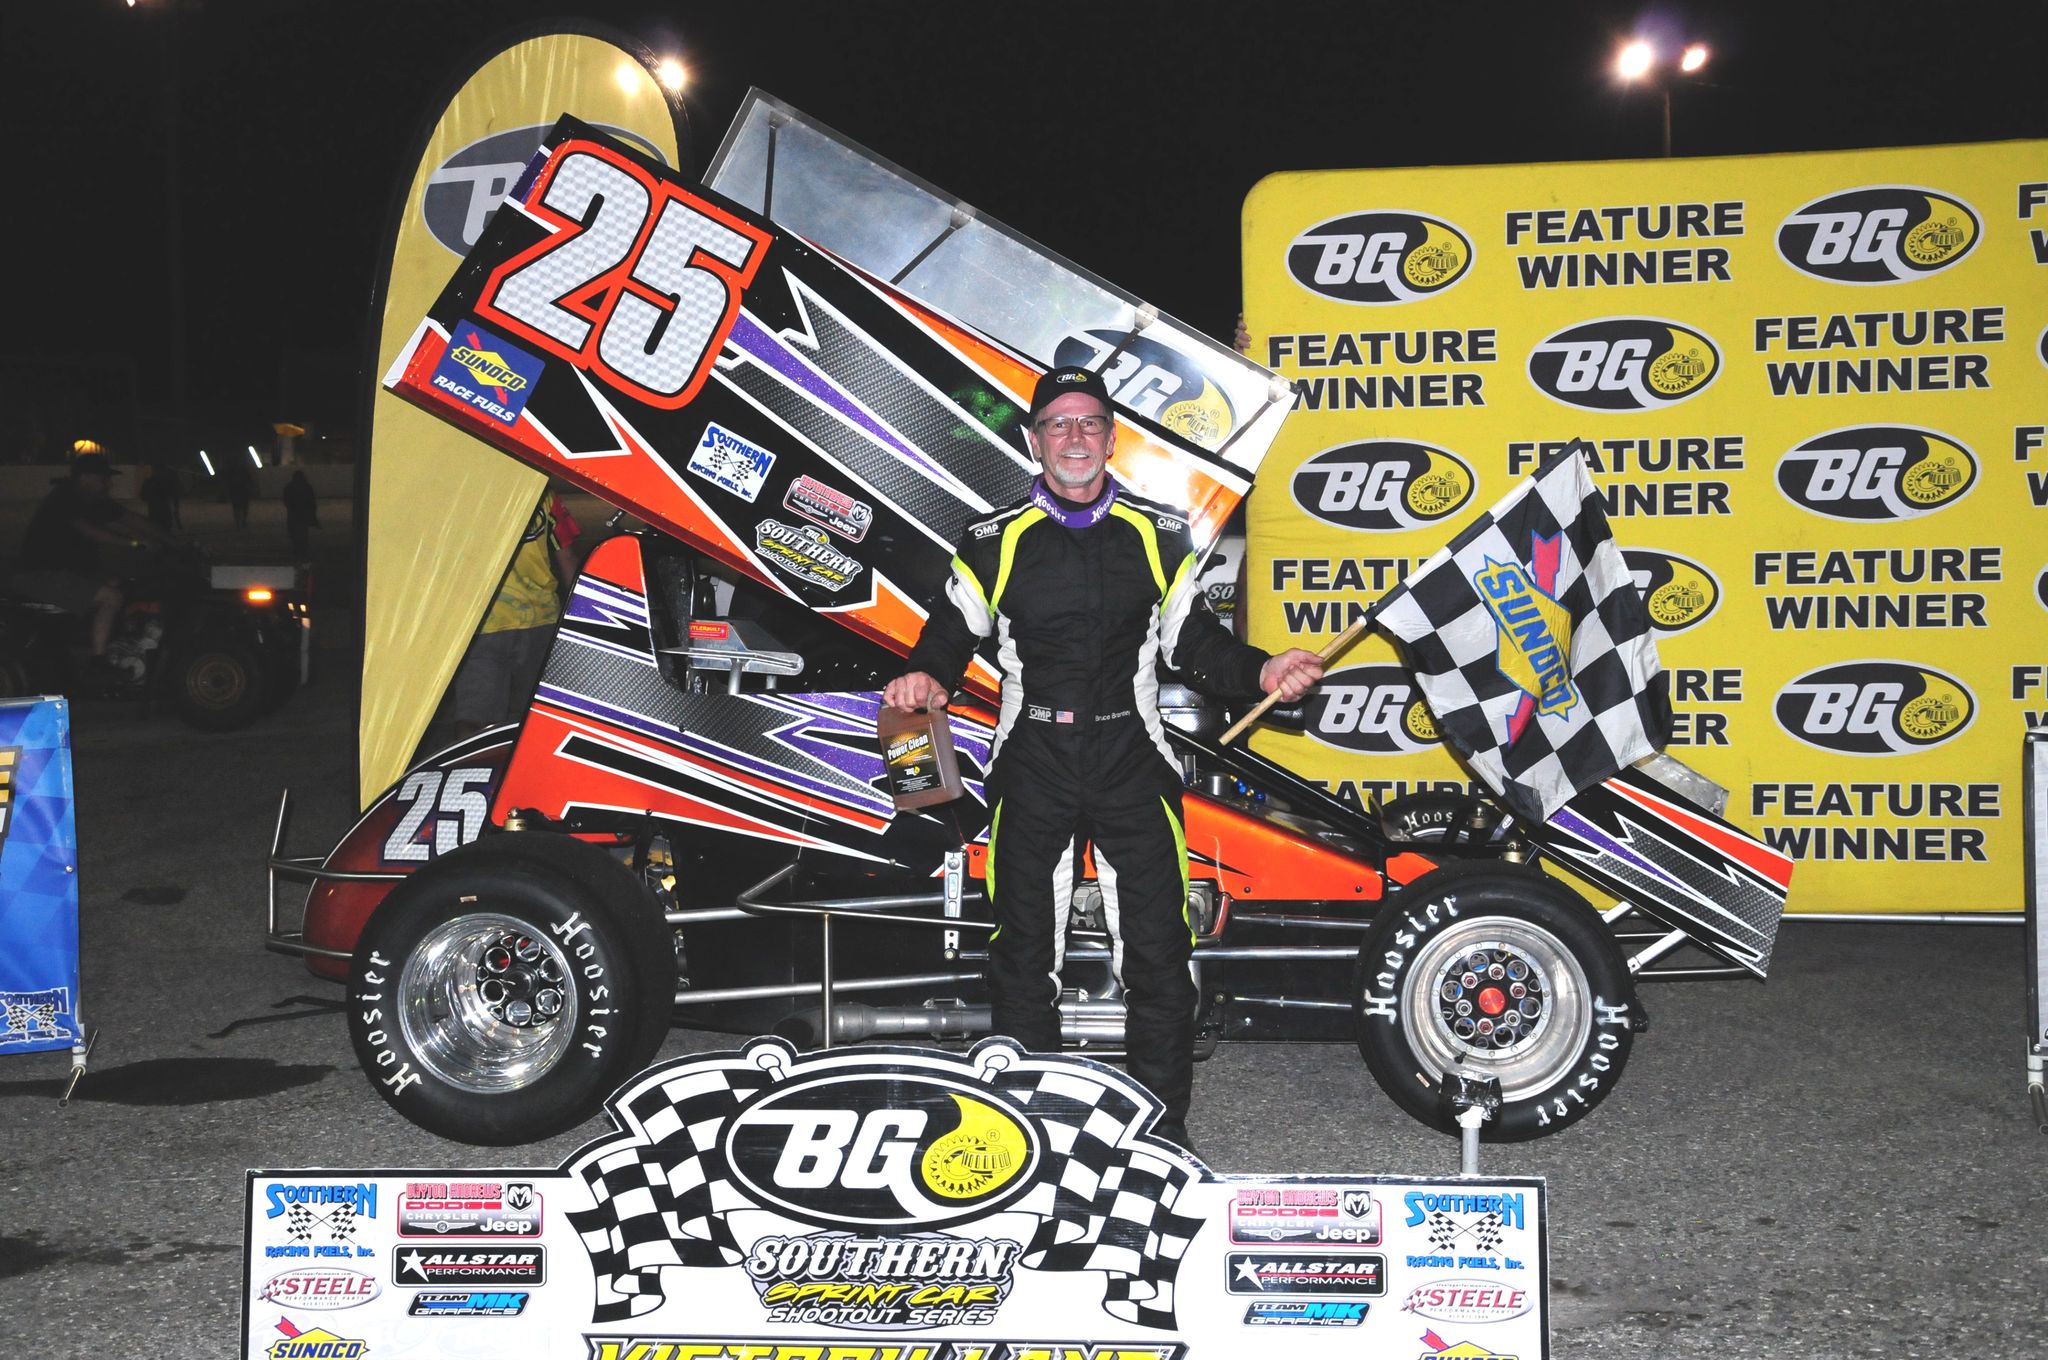 Bruce Brantley wins his first Southern Shootout Series win at